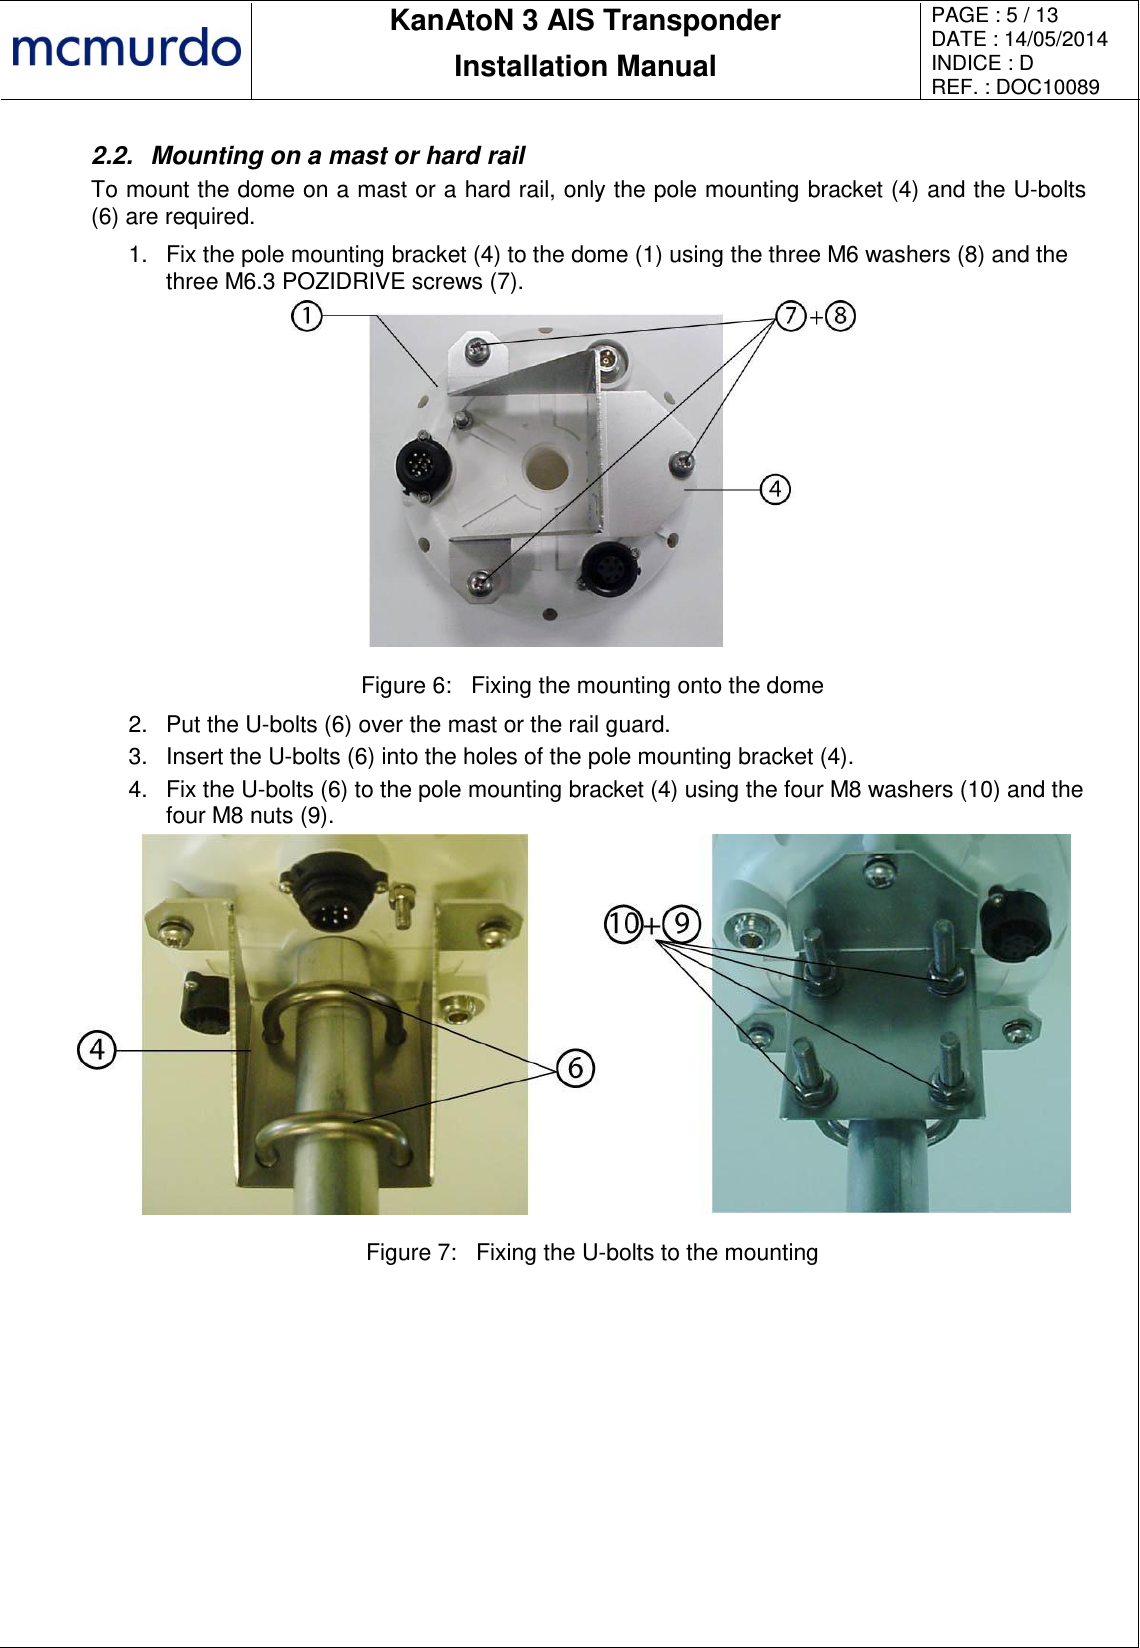       KanAtoN 3 AIS Transponder Installation Manual PAGE : 5 / 13 DATE : 14/05/2014 INDICE : D REF. : DOC10089   2.2.  Mounting on a mast or hard rail To mount the dome on a mast or a hard rail, only the pole mounting bracket (4) and the U-bolts (6) are required. 1.  Fix the pole mounting bracket (4) to the dome (1) using the three M6 washers (8) and the three M6.3 POZIDRIVE screws (7).  Figure 6:  Fixing the mounting onto the dome 2.  Put the U-bolts (6) over the mast or the rail guard. 3.  Insert the U-bolts (6) into the holes of the pole mounting bracket (4). 4.  Fix the U-bolts (6) to the pole mounting bracket (4) using the four M8 washers (10) and the four M8 nuts (9).  Figure 7:  Fixing the U-bolts to the mounting 